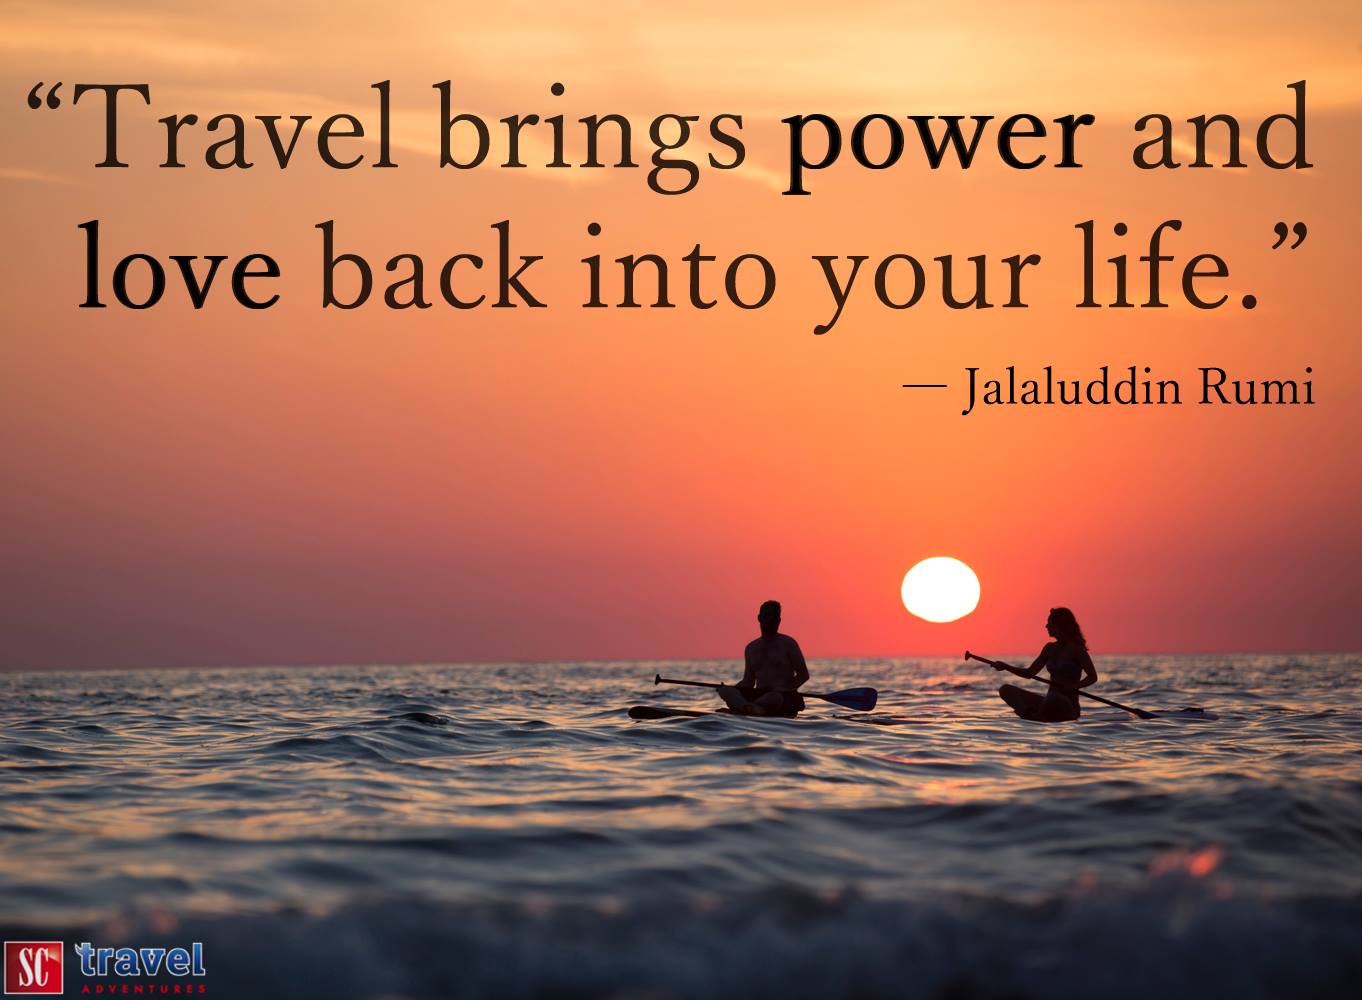 Two kayakers at sunset with a quote about travel